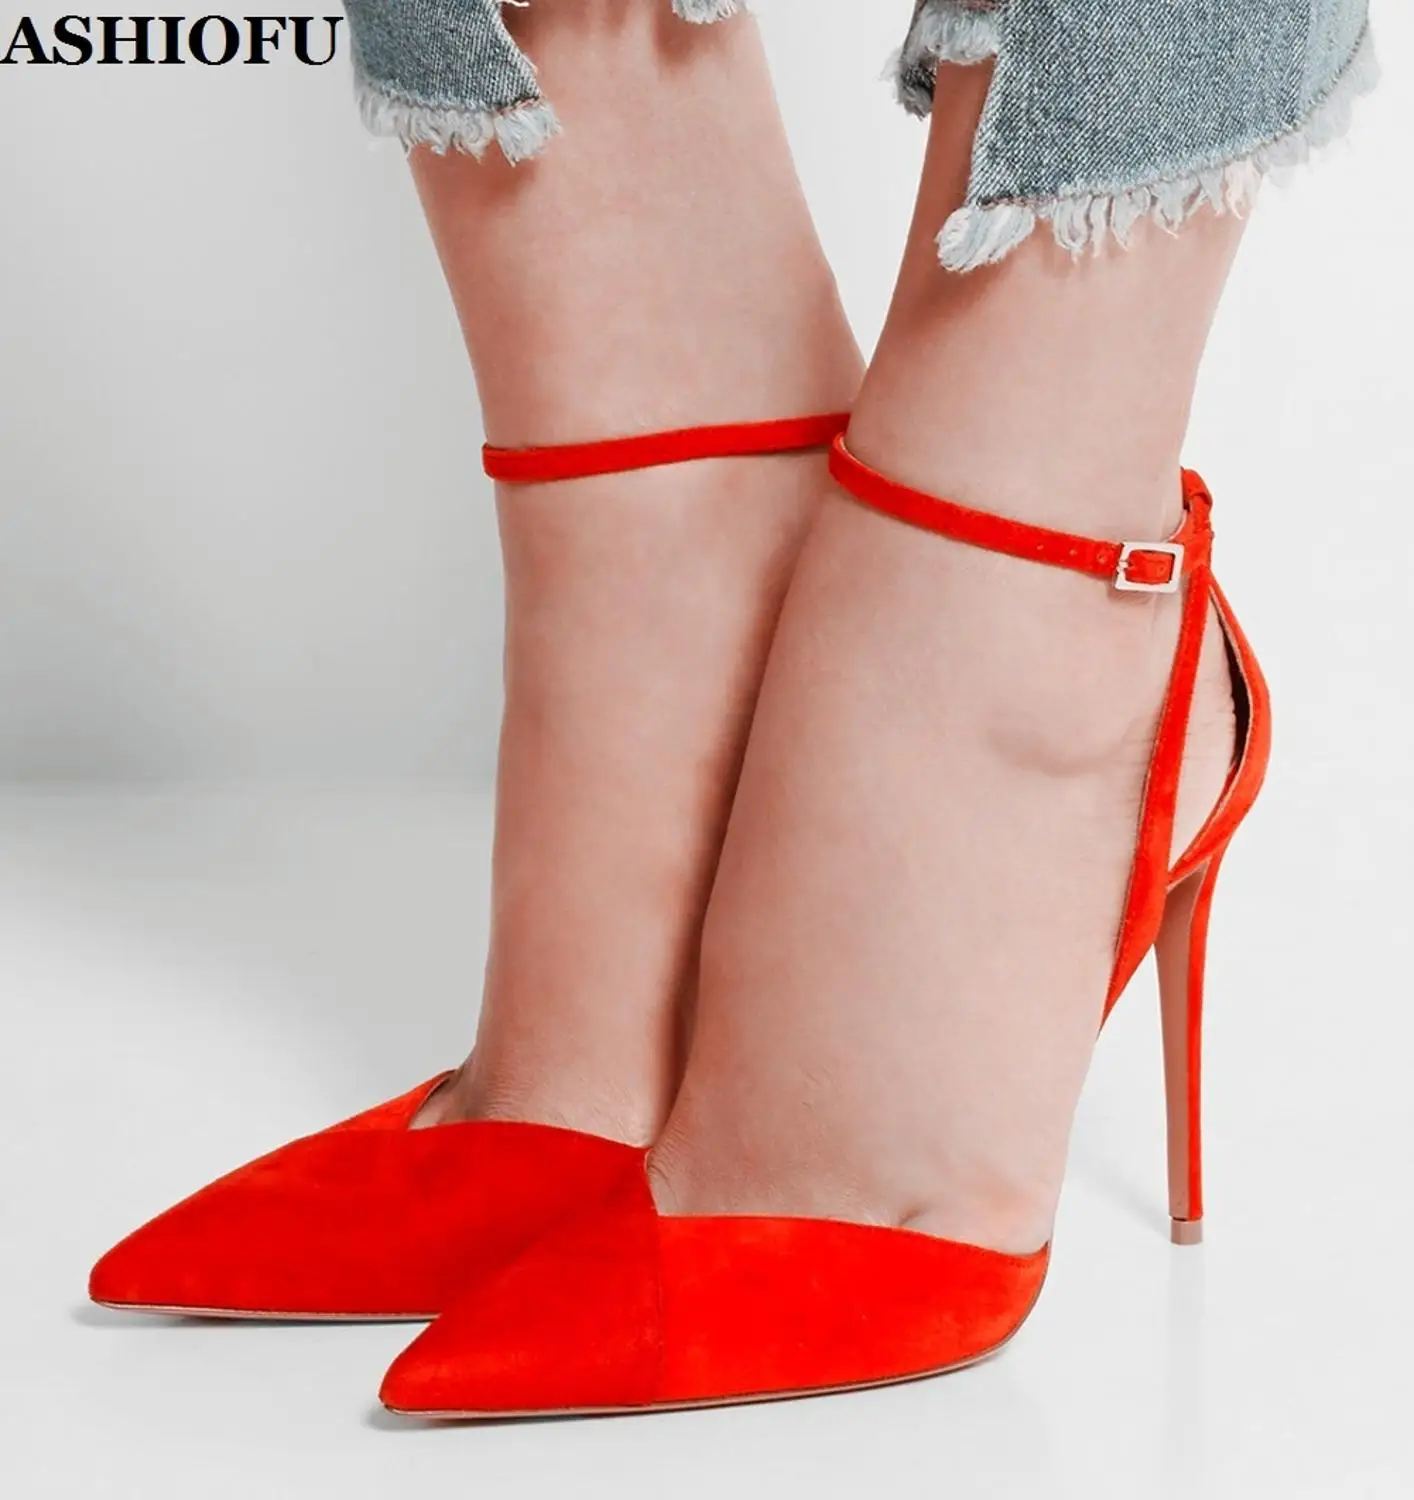 ASHIOFU New Style Hot Sale Handmade Ladies High Heel Sandals D'orsay Buckle Strap Party Dress Shoes Evening Fashion Sandal Shoes